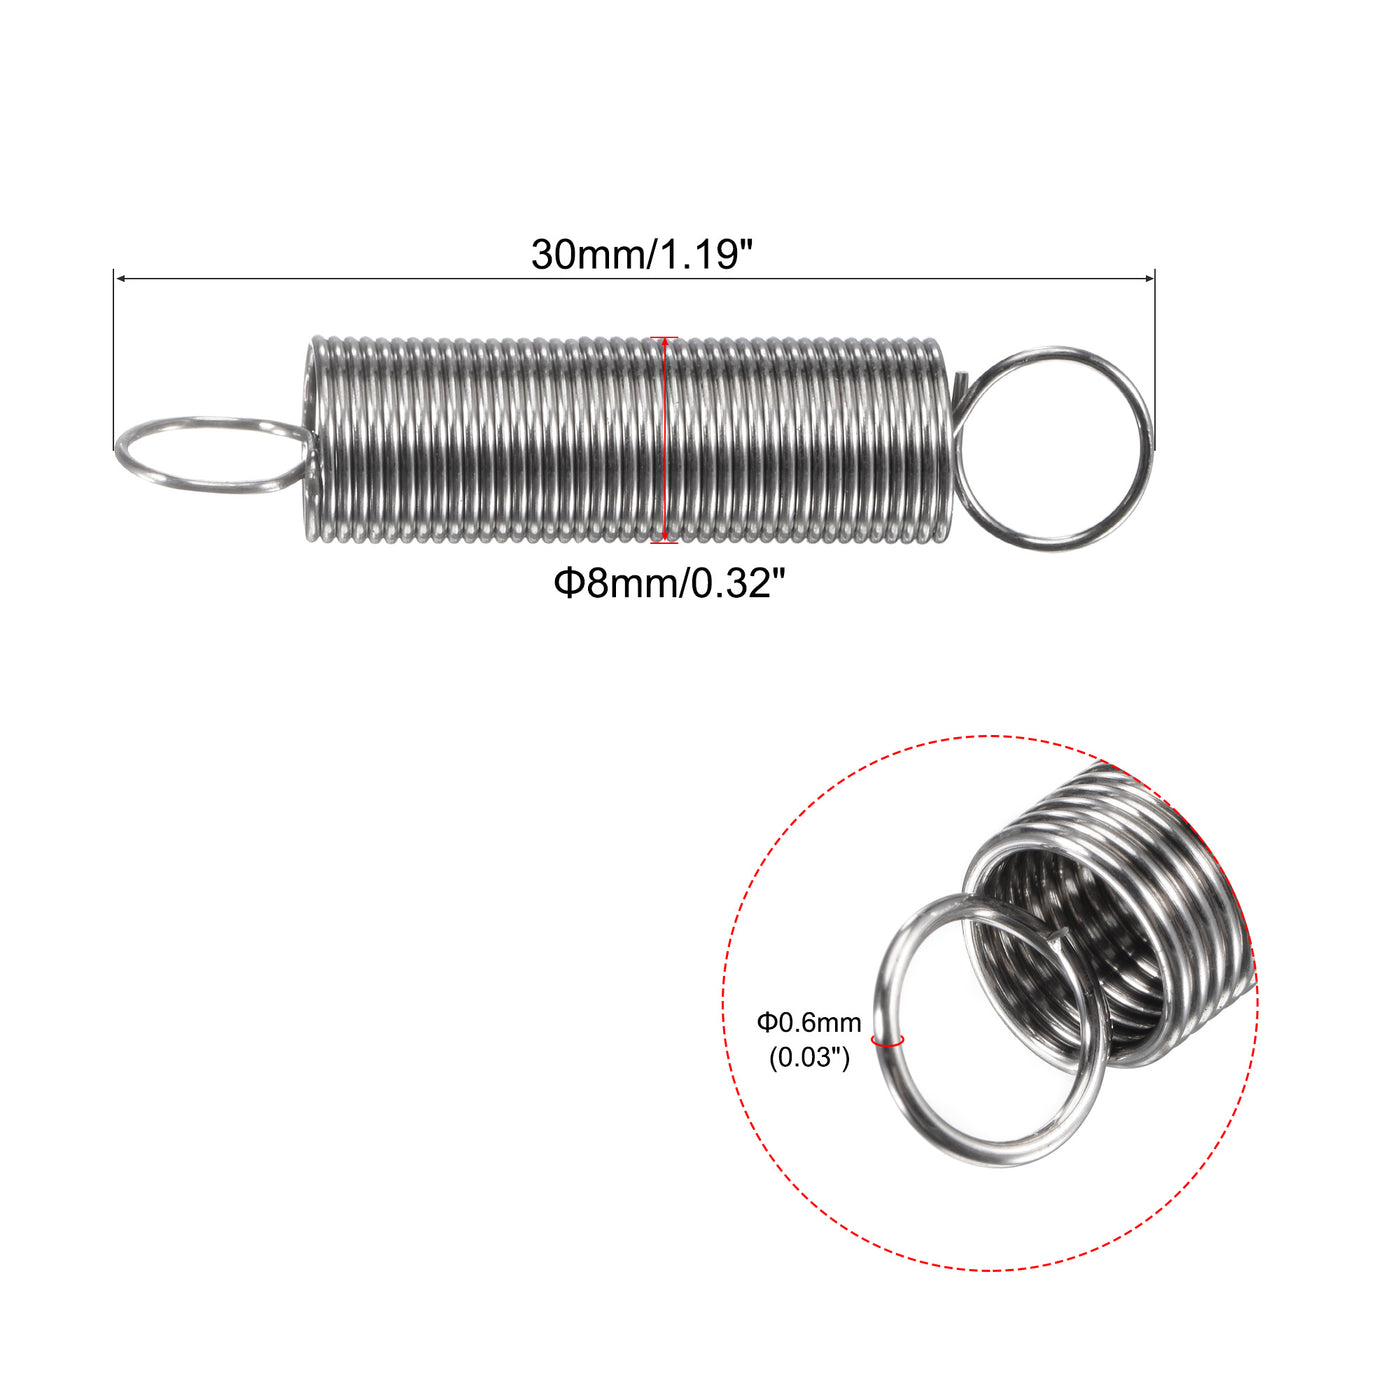 Uxcell Uxcell 0.6mmx8mmx60mm Extended Compression Spring,2.3Lbs Load Capacity,Silver,5pcs